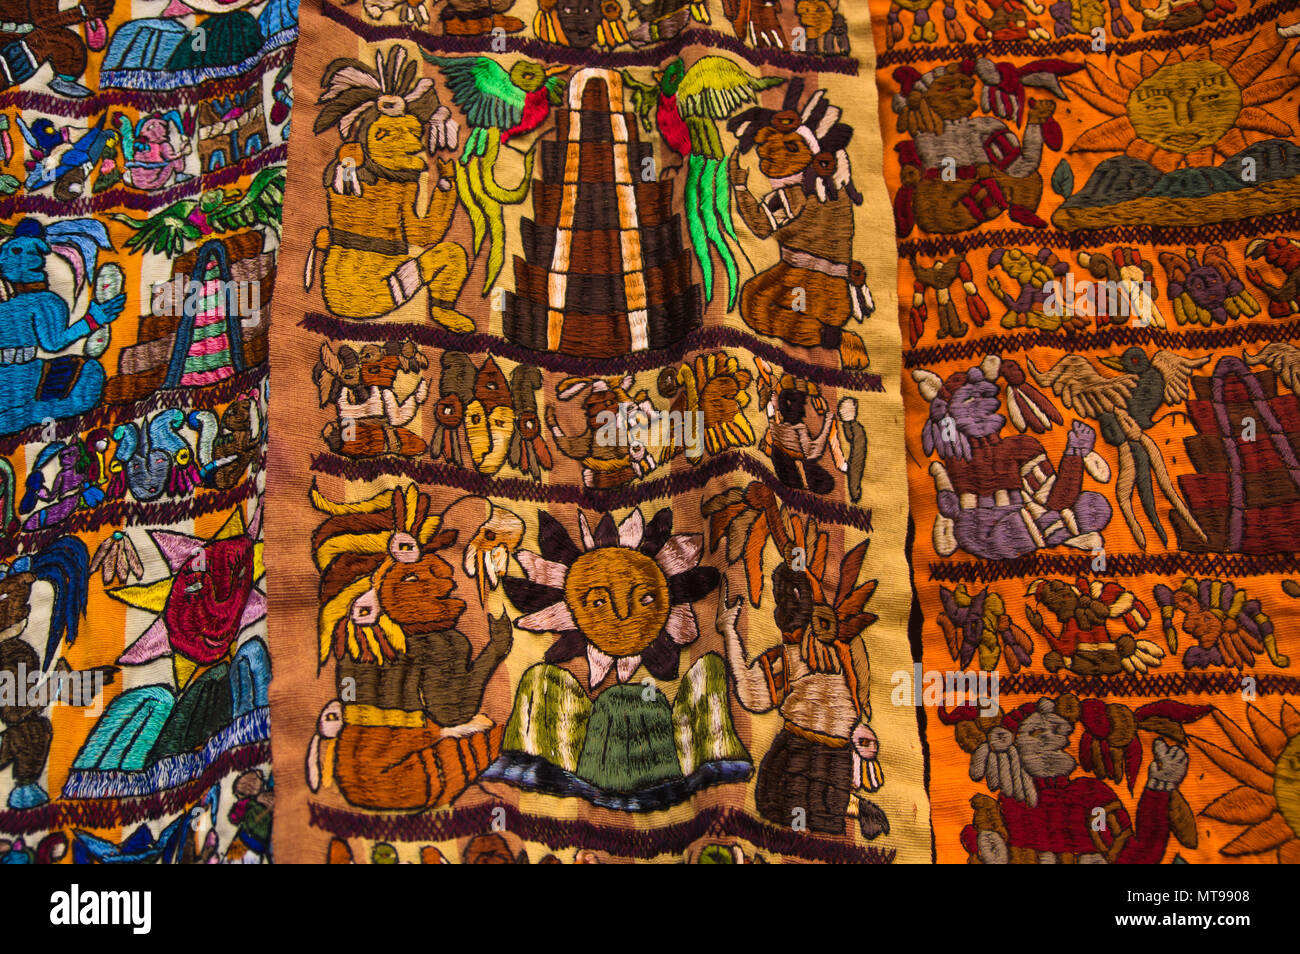 Ciudad de Guatemala, Guatemala, April, 25, 2018: Typical brightly colored handwoven Guatemalan textiles for sale by local indigenous people at an open air street market in Antigua Stock Photo